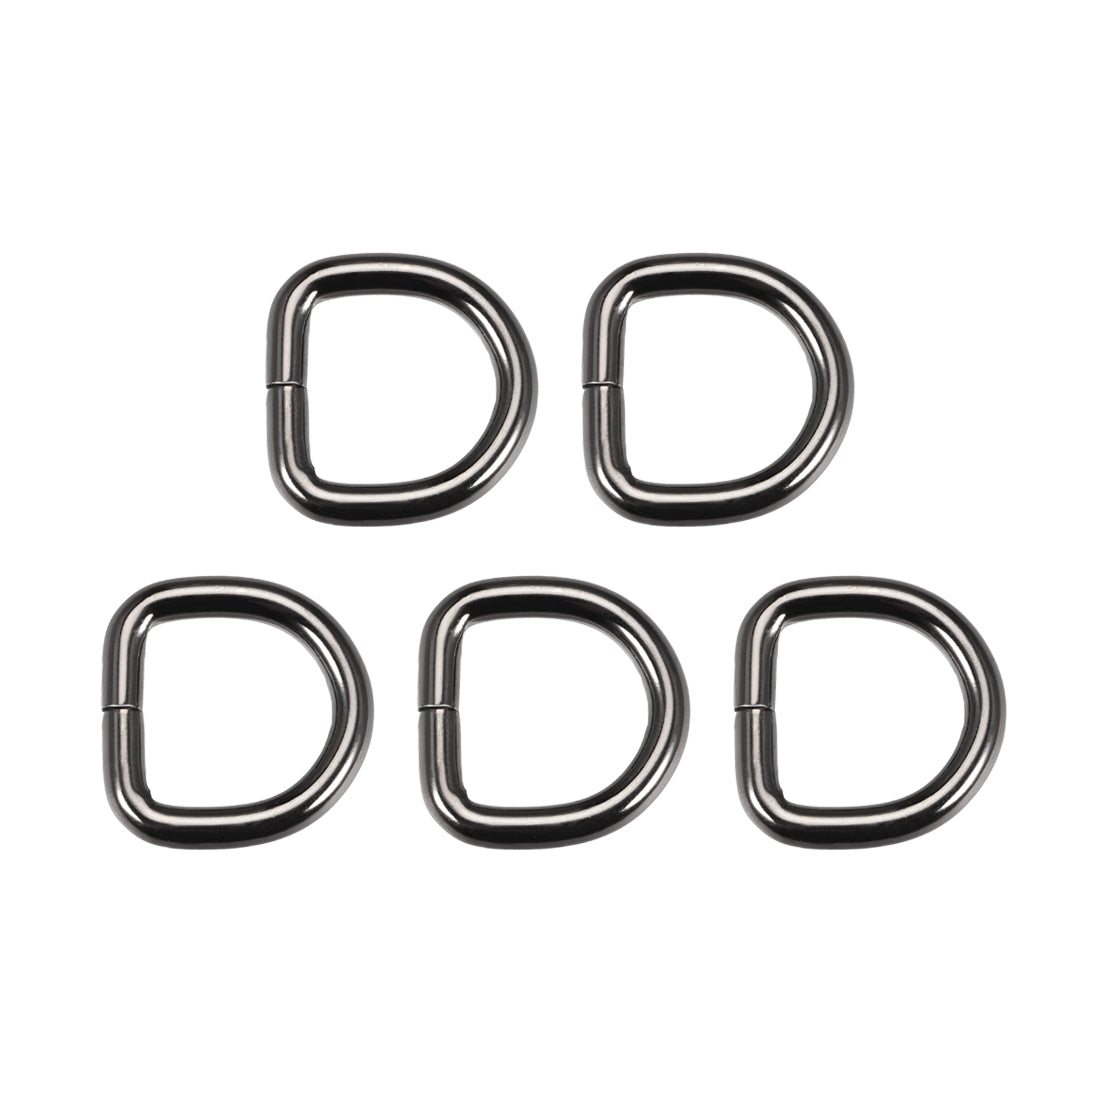 uxcell Uxcell 5 Pcs D Ring Buckle 0.8 Inch Metal Semi-Circular D-Rings Black for Hardware Bags Belts Craft DIY Accessories